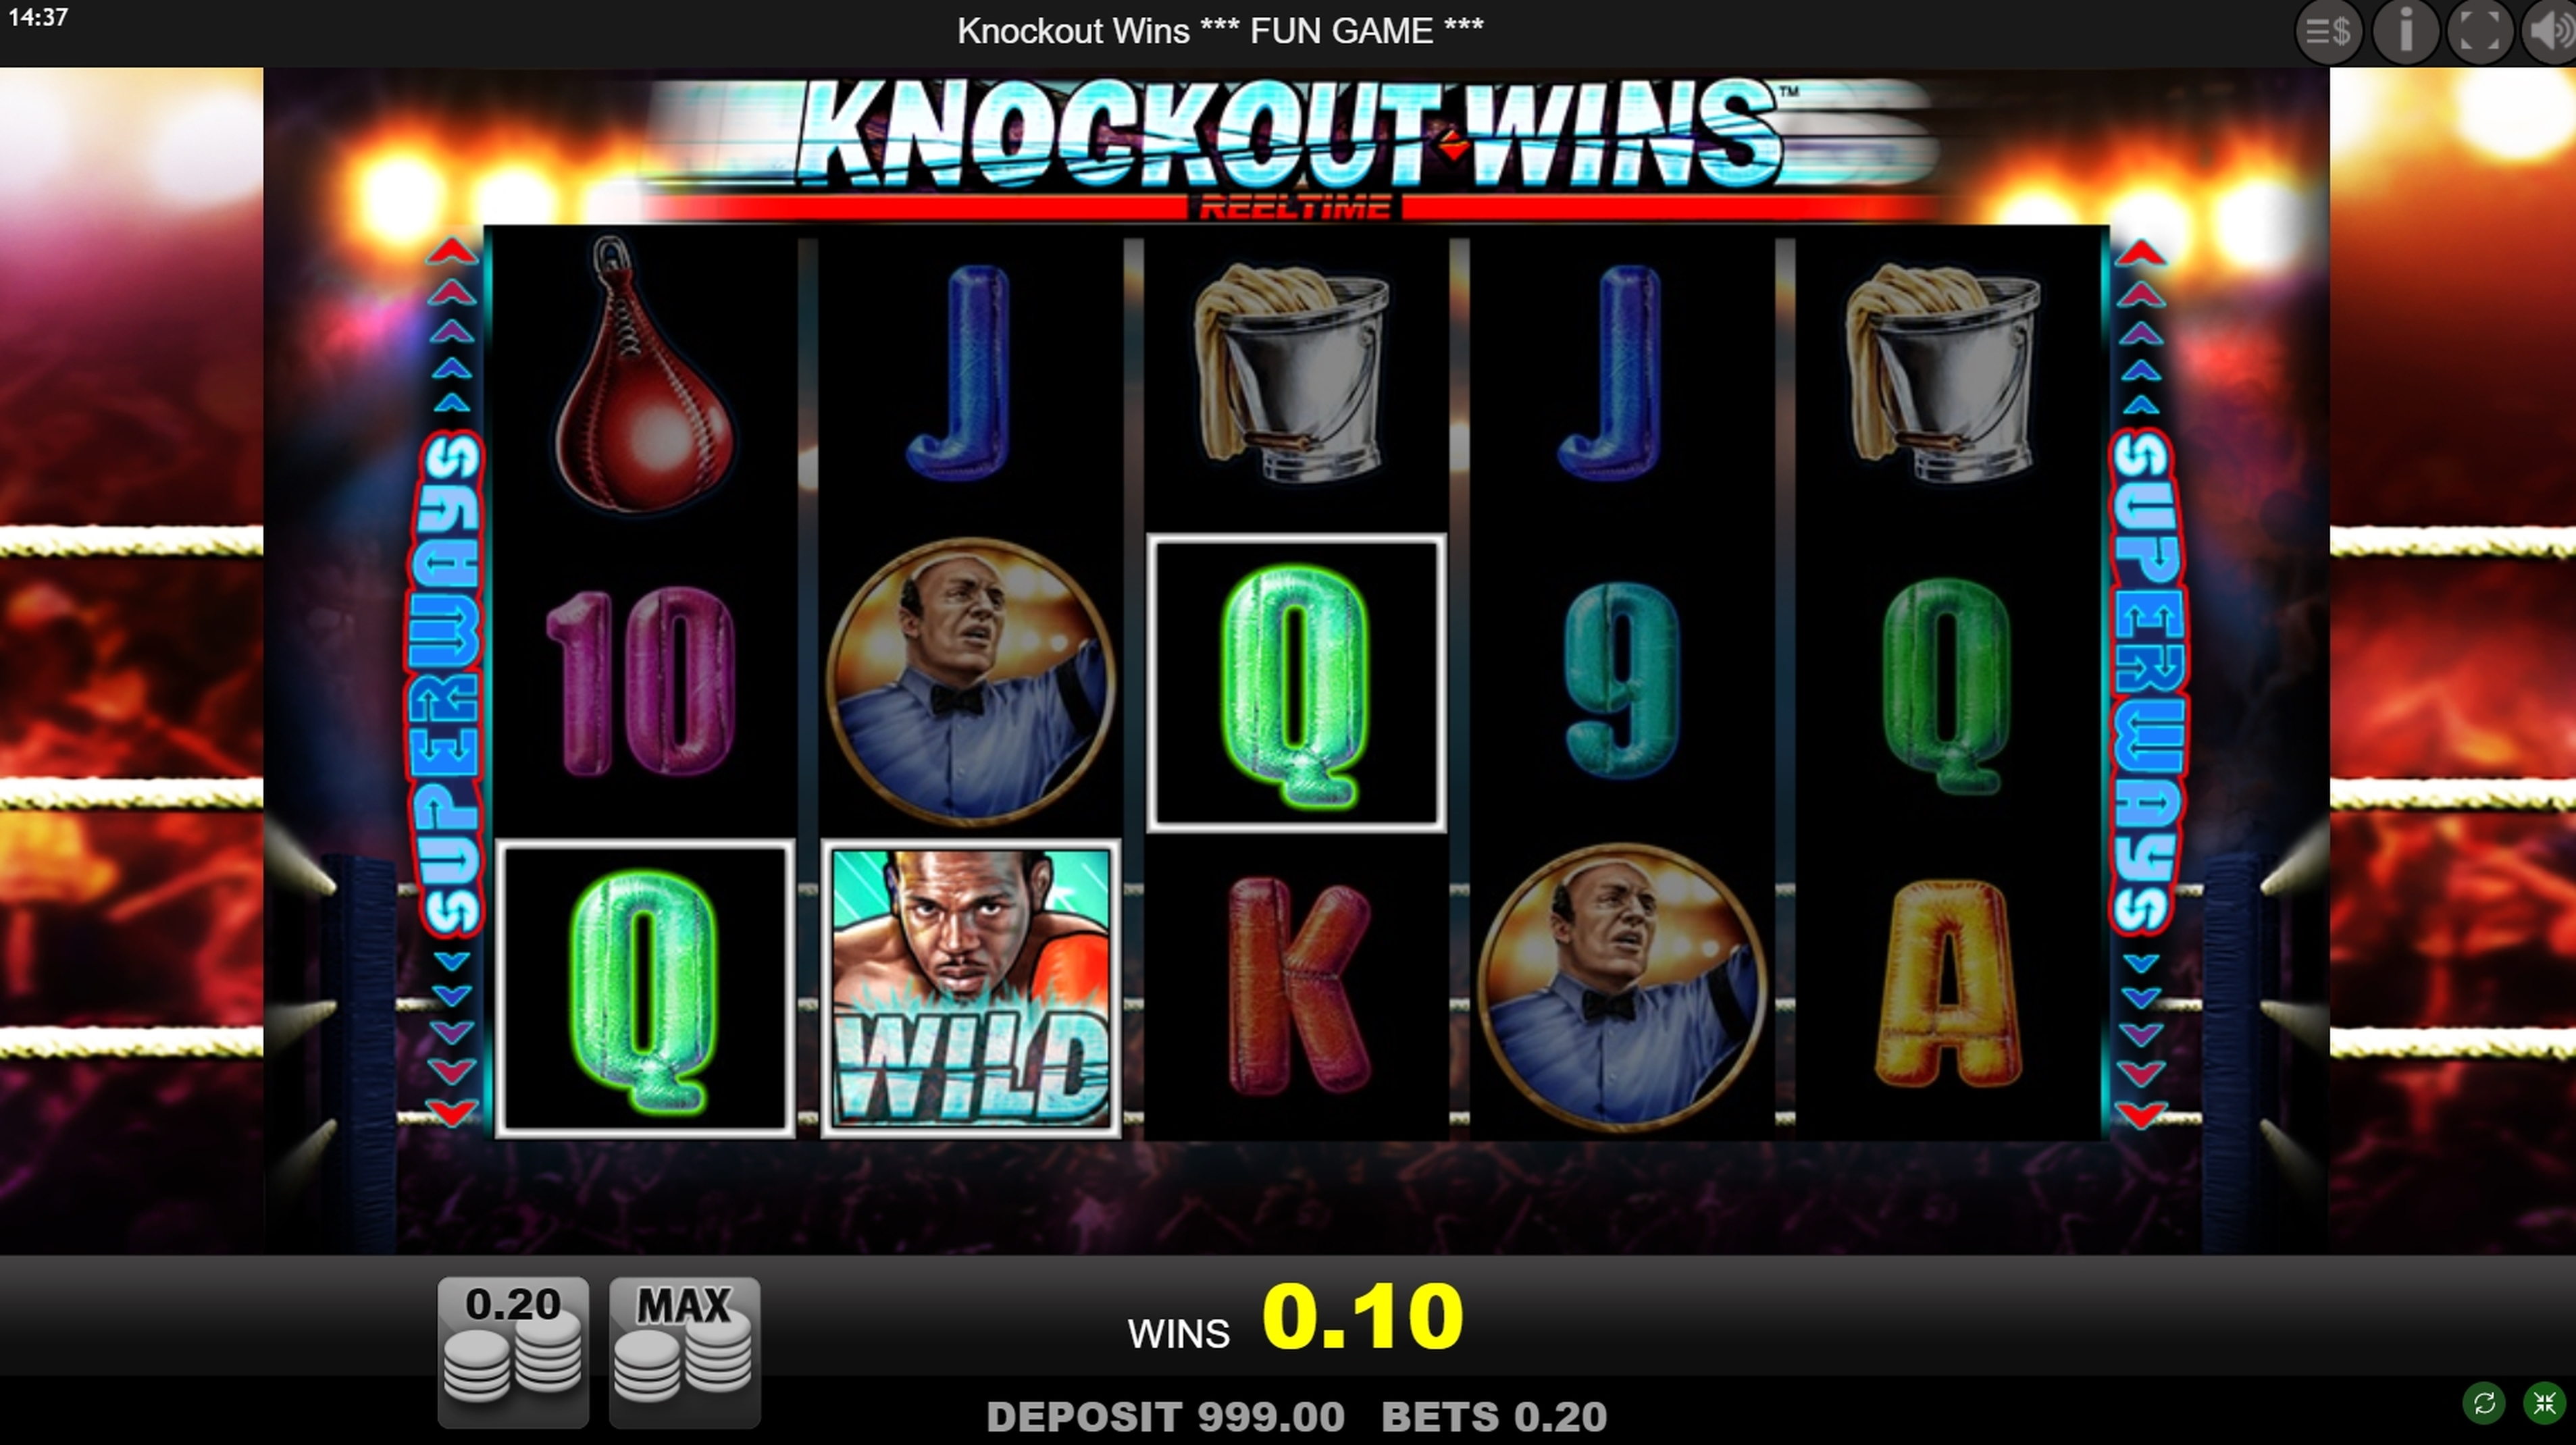 Win Money in Knockout Wins Free Slot Game by Merkur Gaming